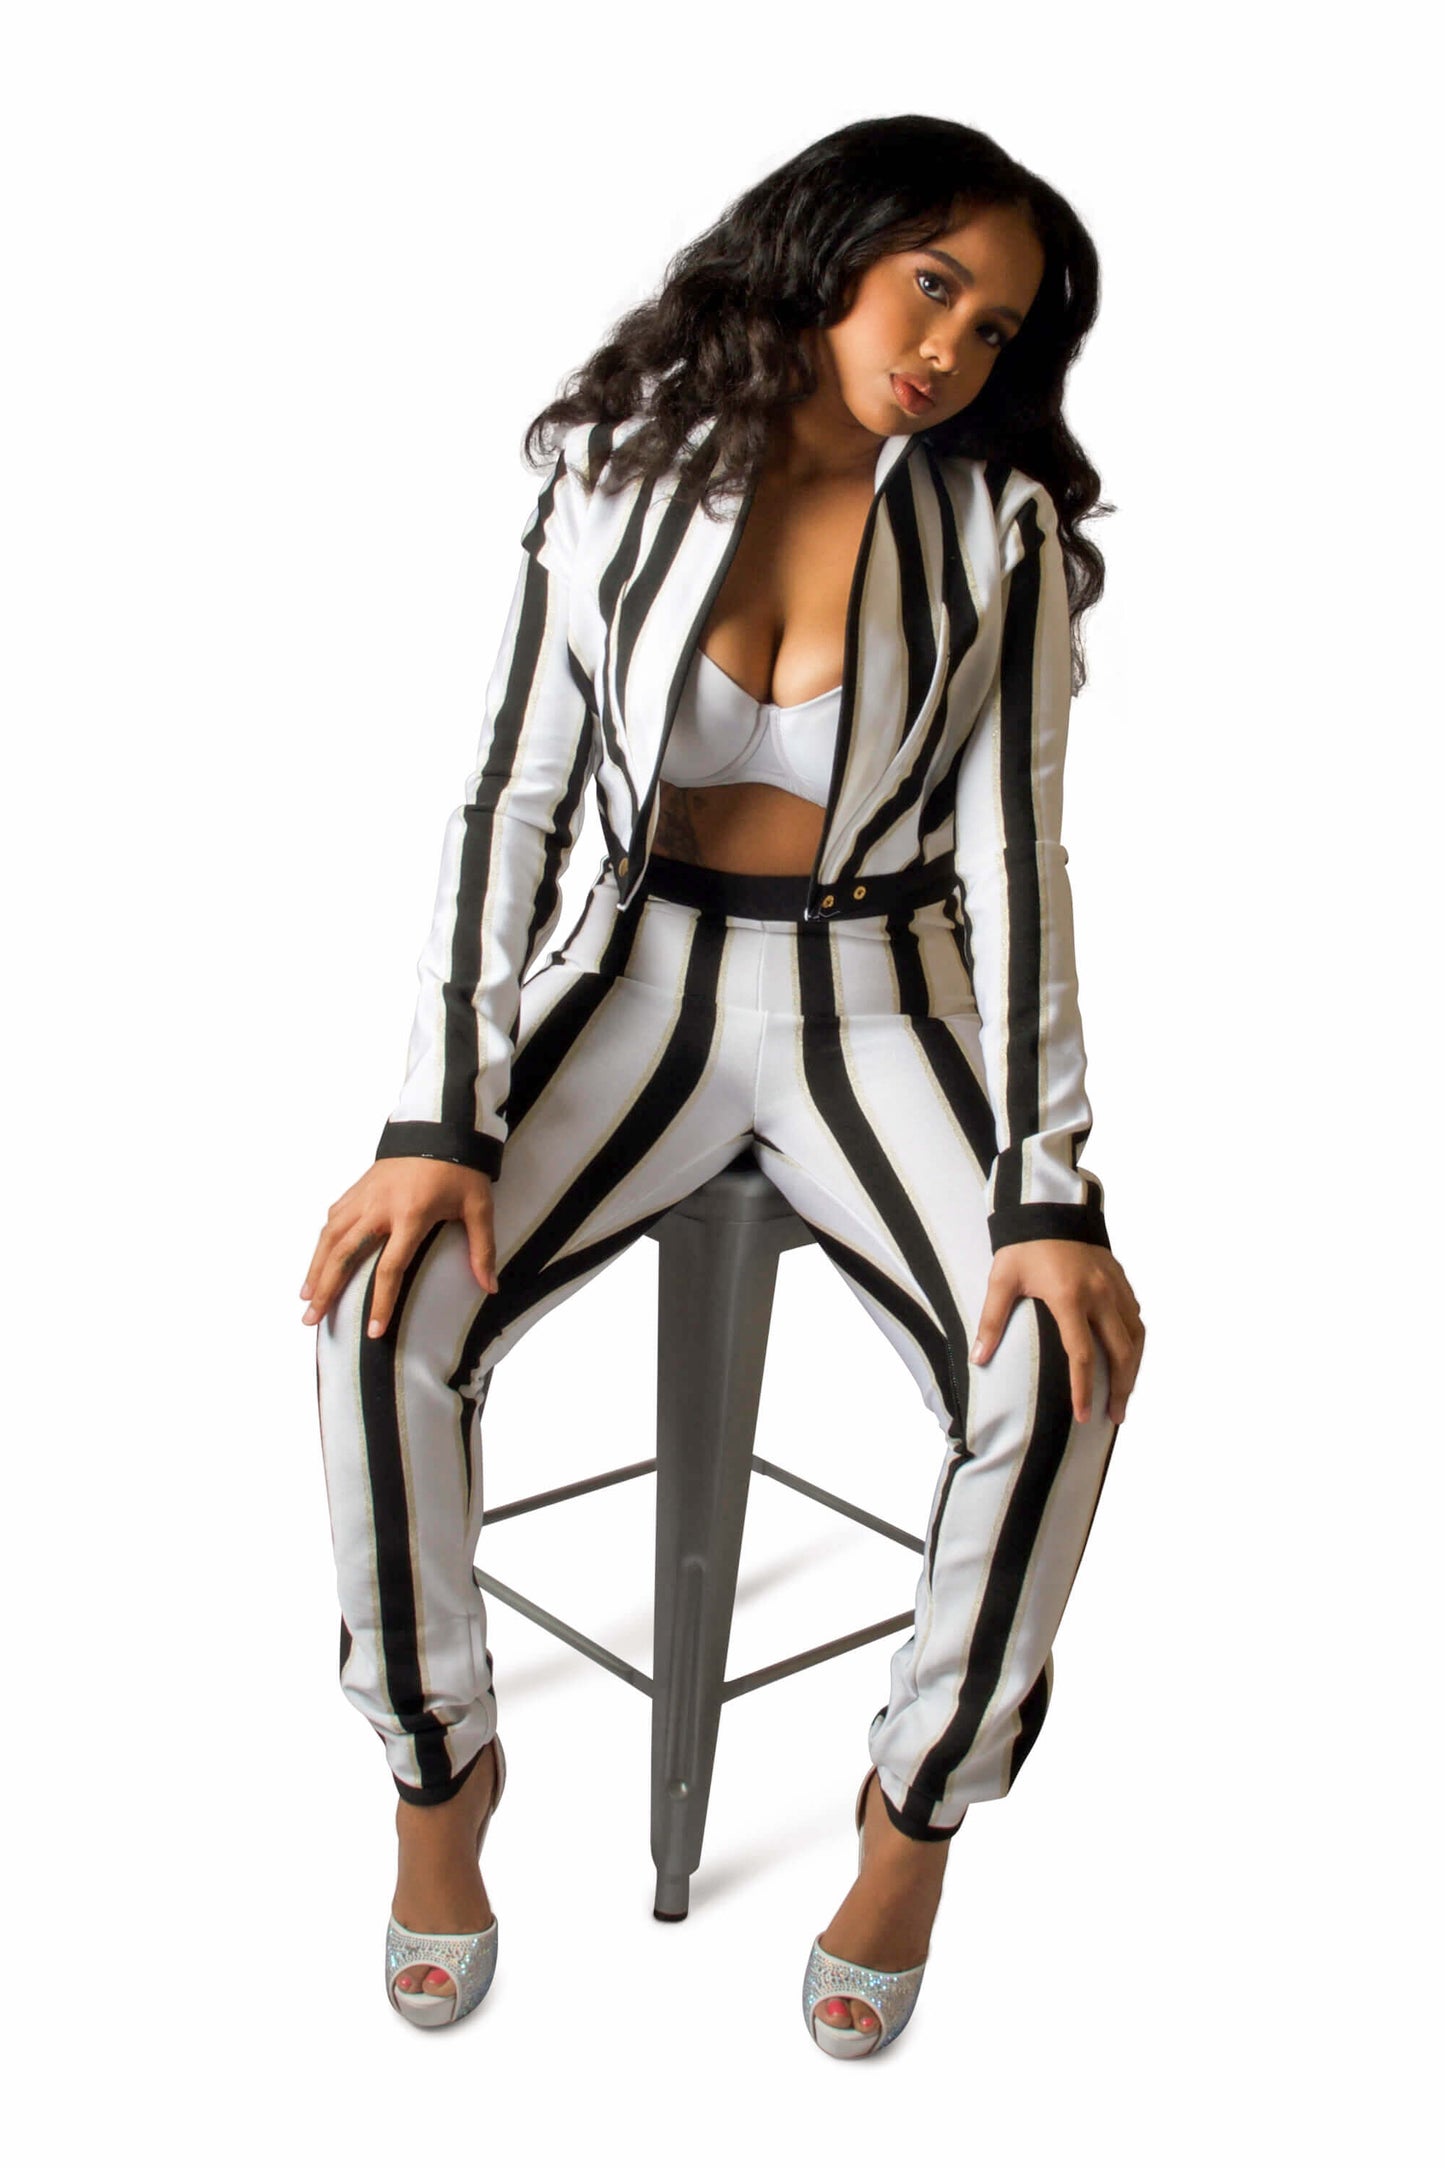 Stripe Black & White Two Piece Set for women ﻿Jacket  featuring a collar with open front and long Sleeve paired with matching Stretch High Waist Pants